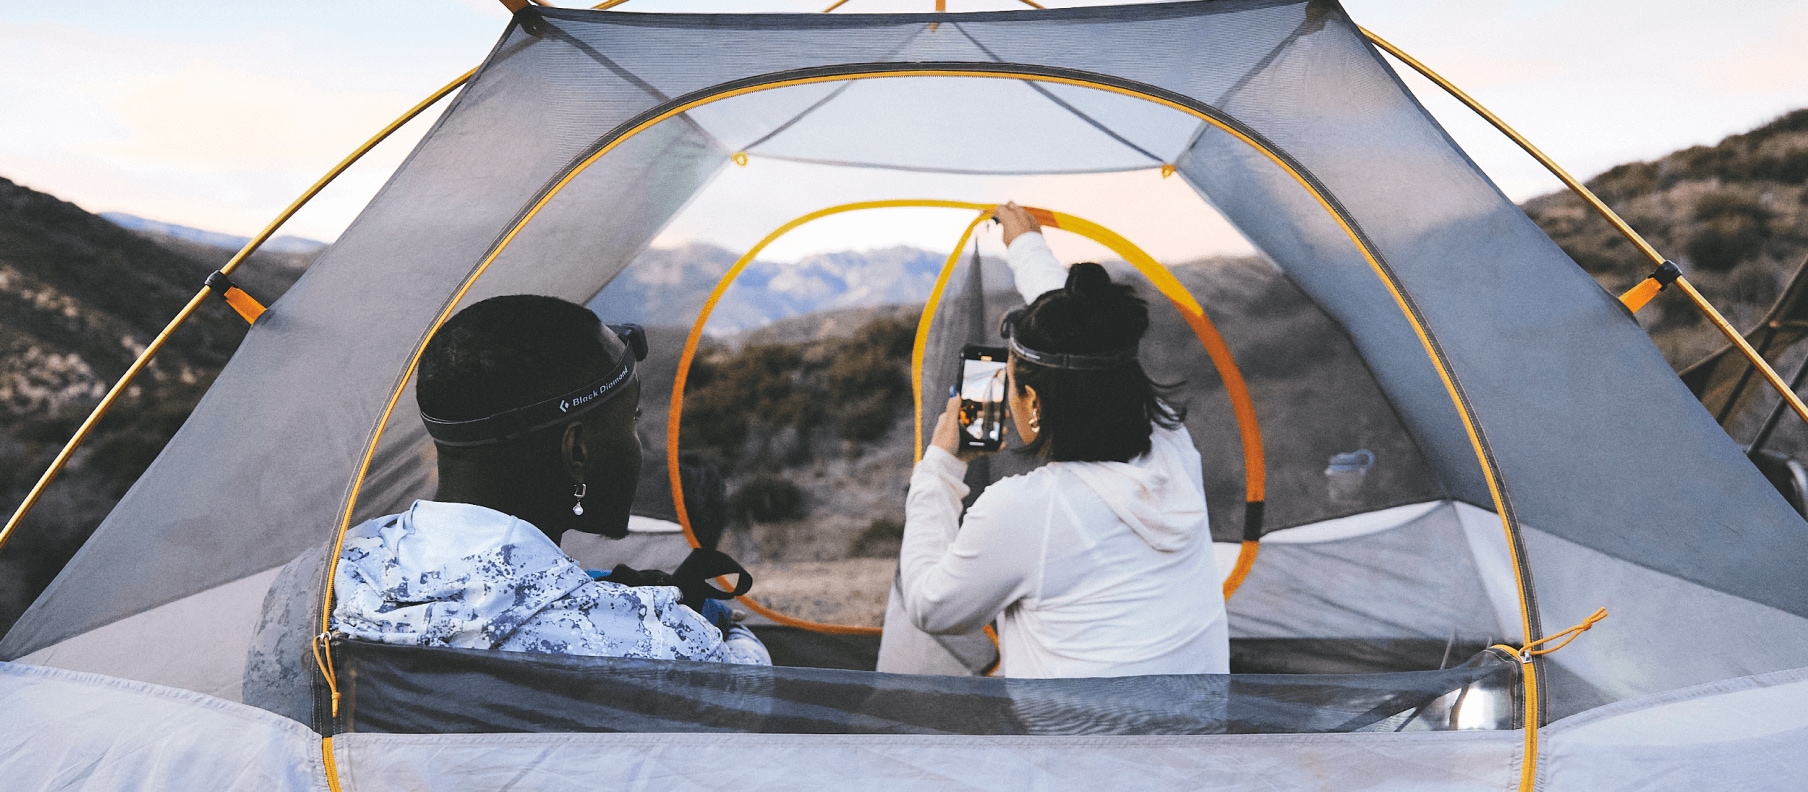 Two people sit in a tent from The North Face with their backs to the camera.  